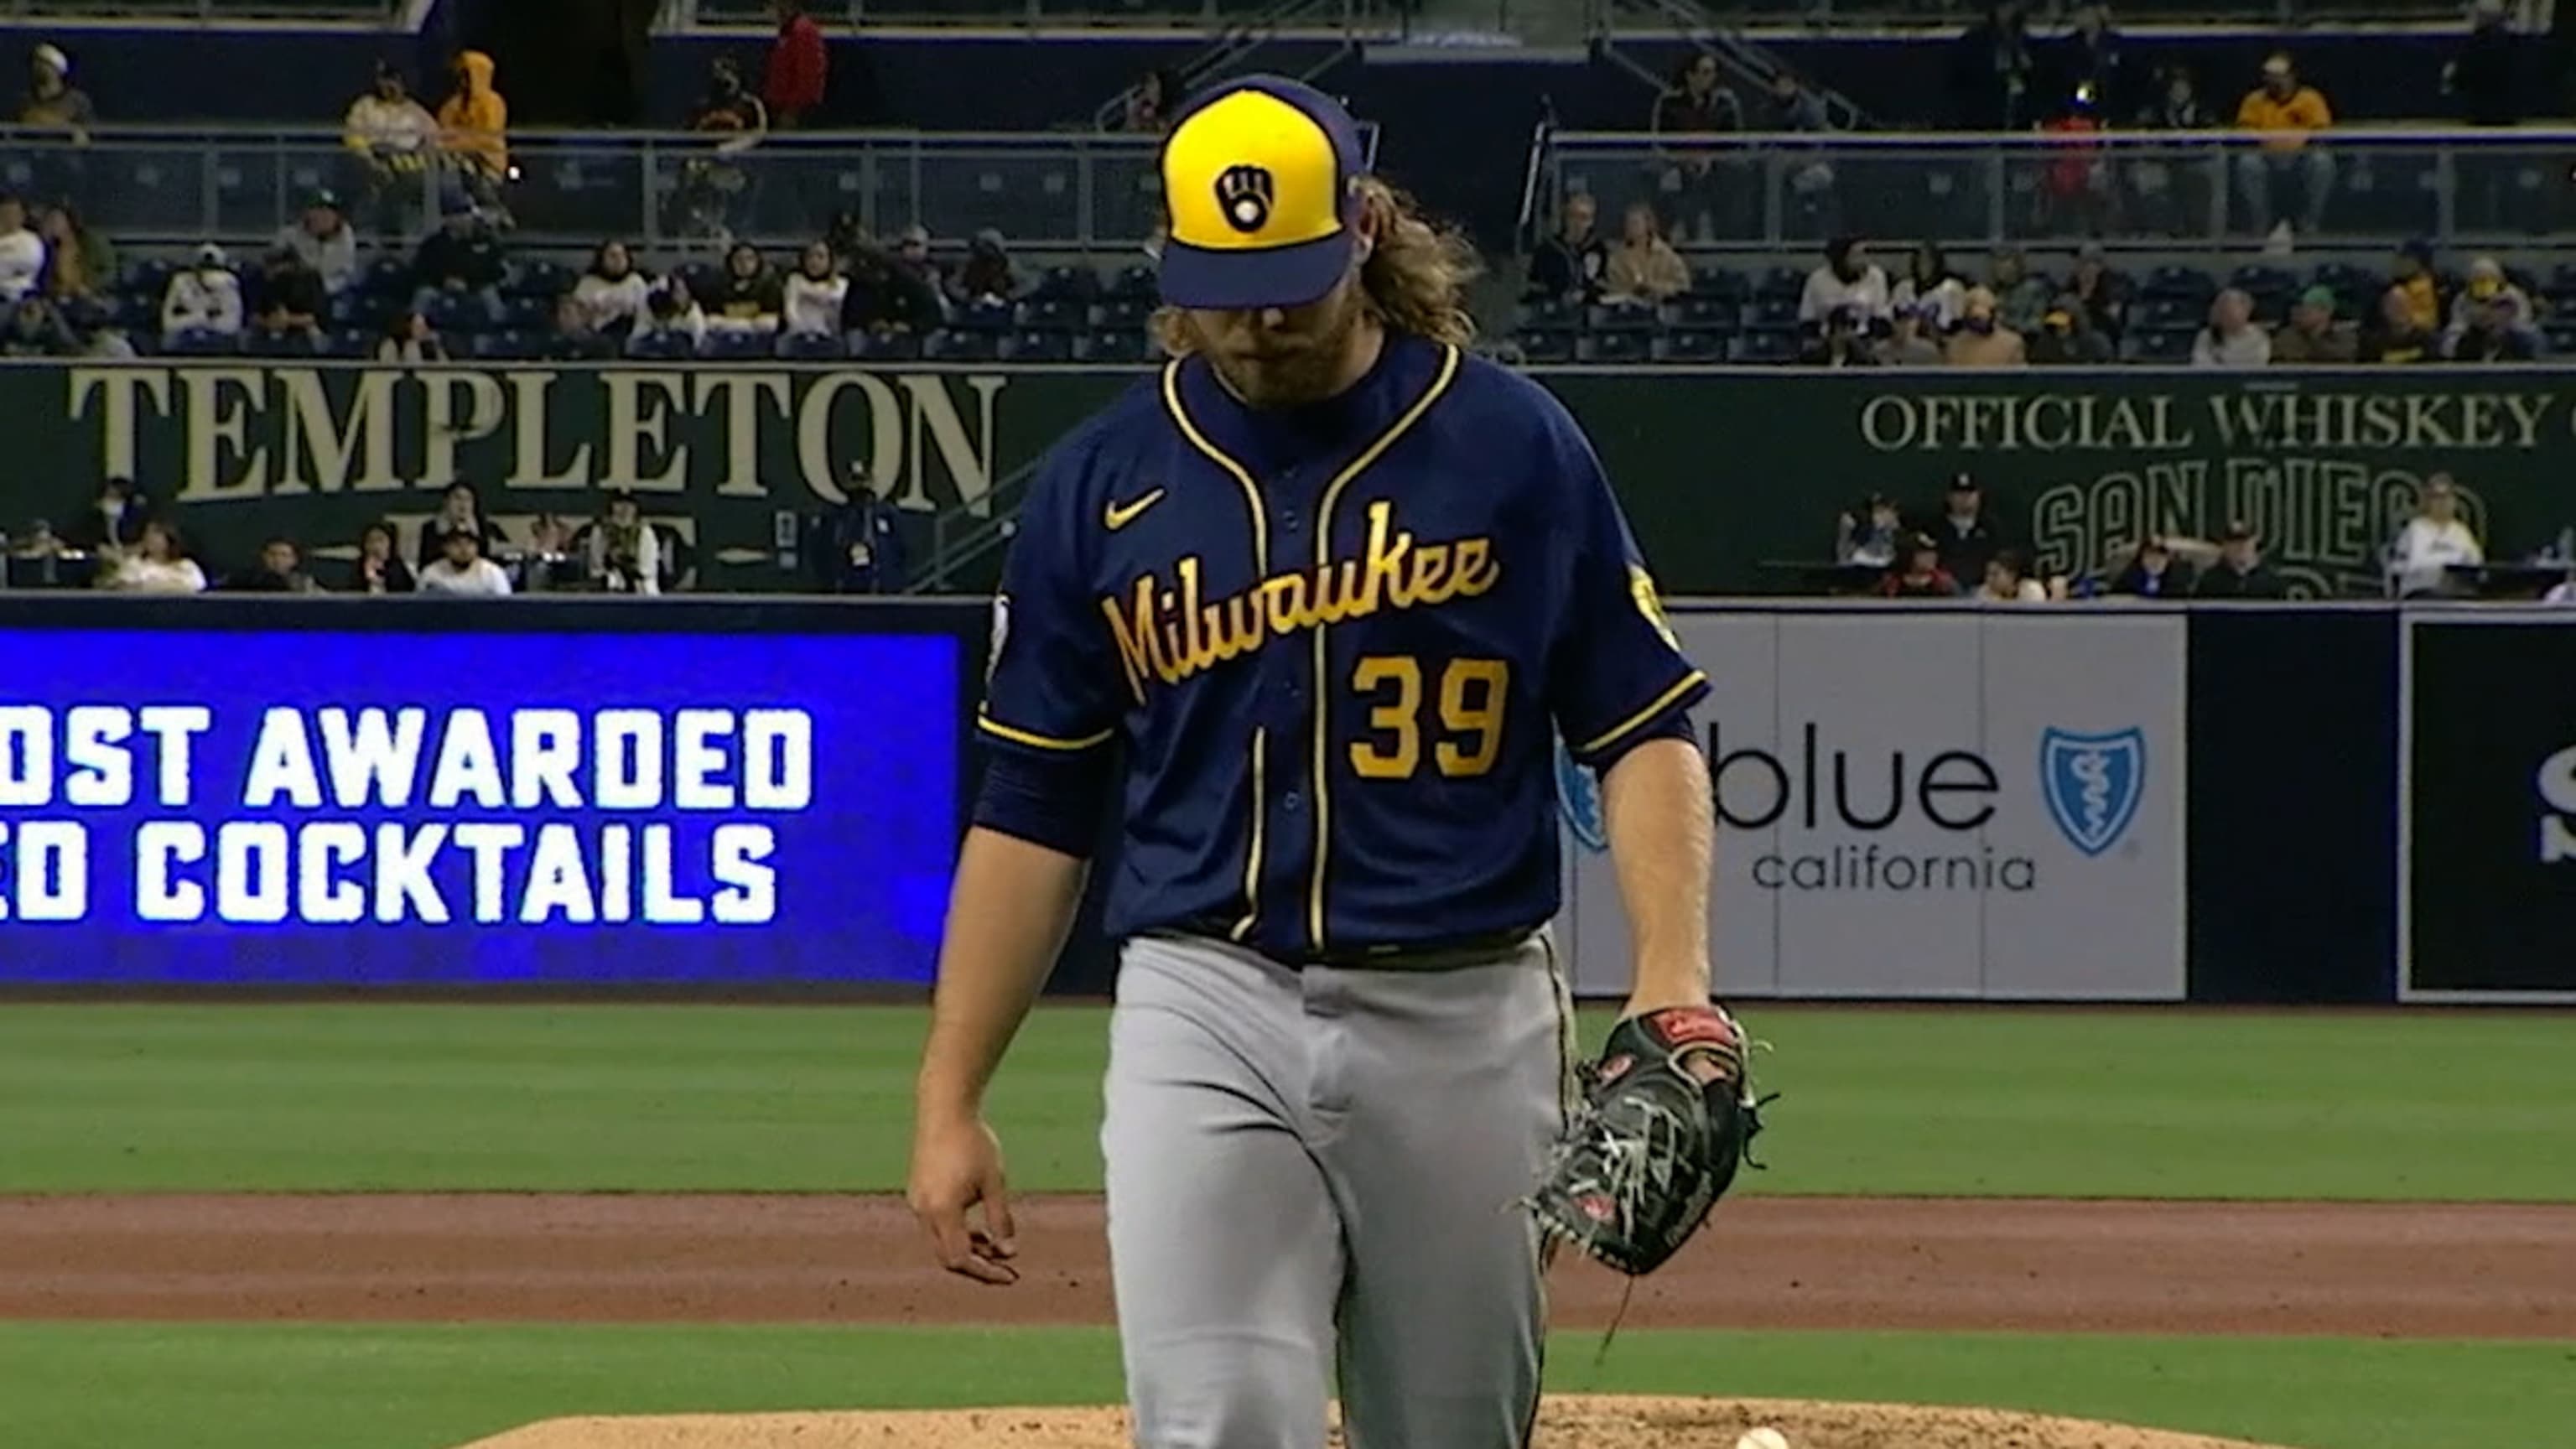 Corbin Burnes Could Be First Brewers Pitcher to Lead MLB in K's